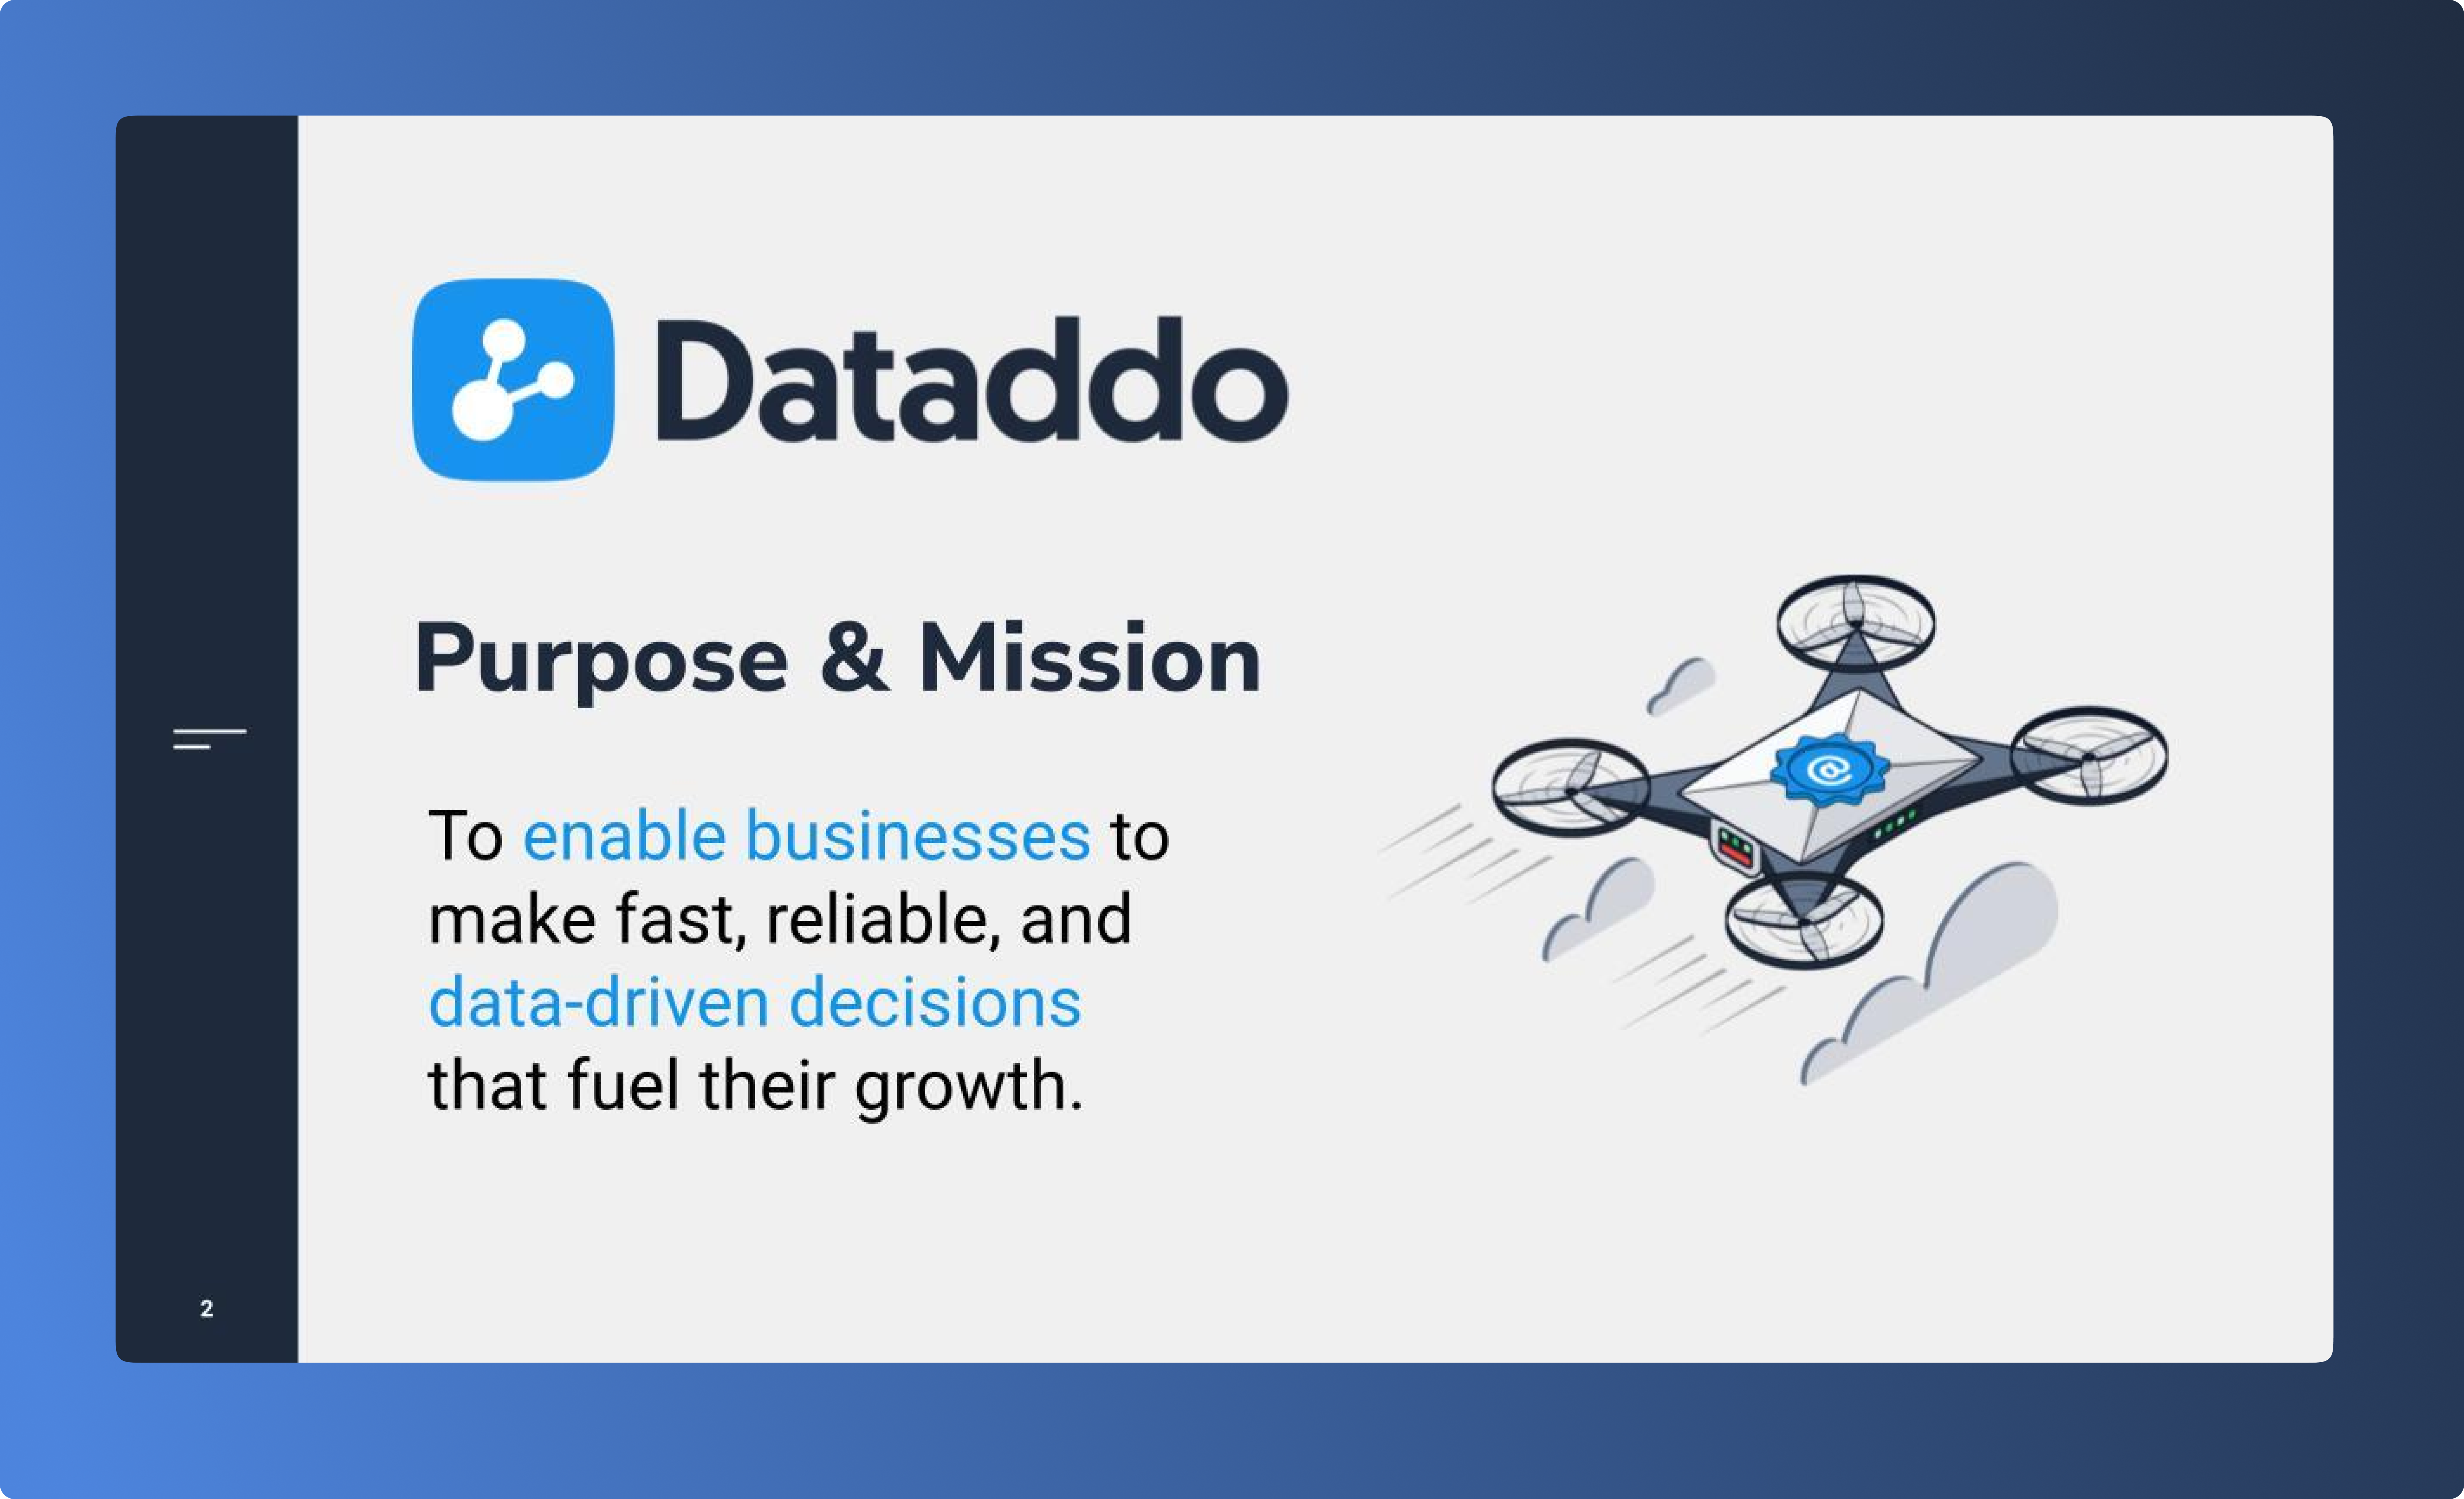 Picture saying "The purpose and mission of Dataddo is to enable businesses to make fast, reliable, and data-driven decisions that fuel their growth".